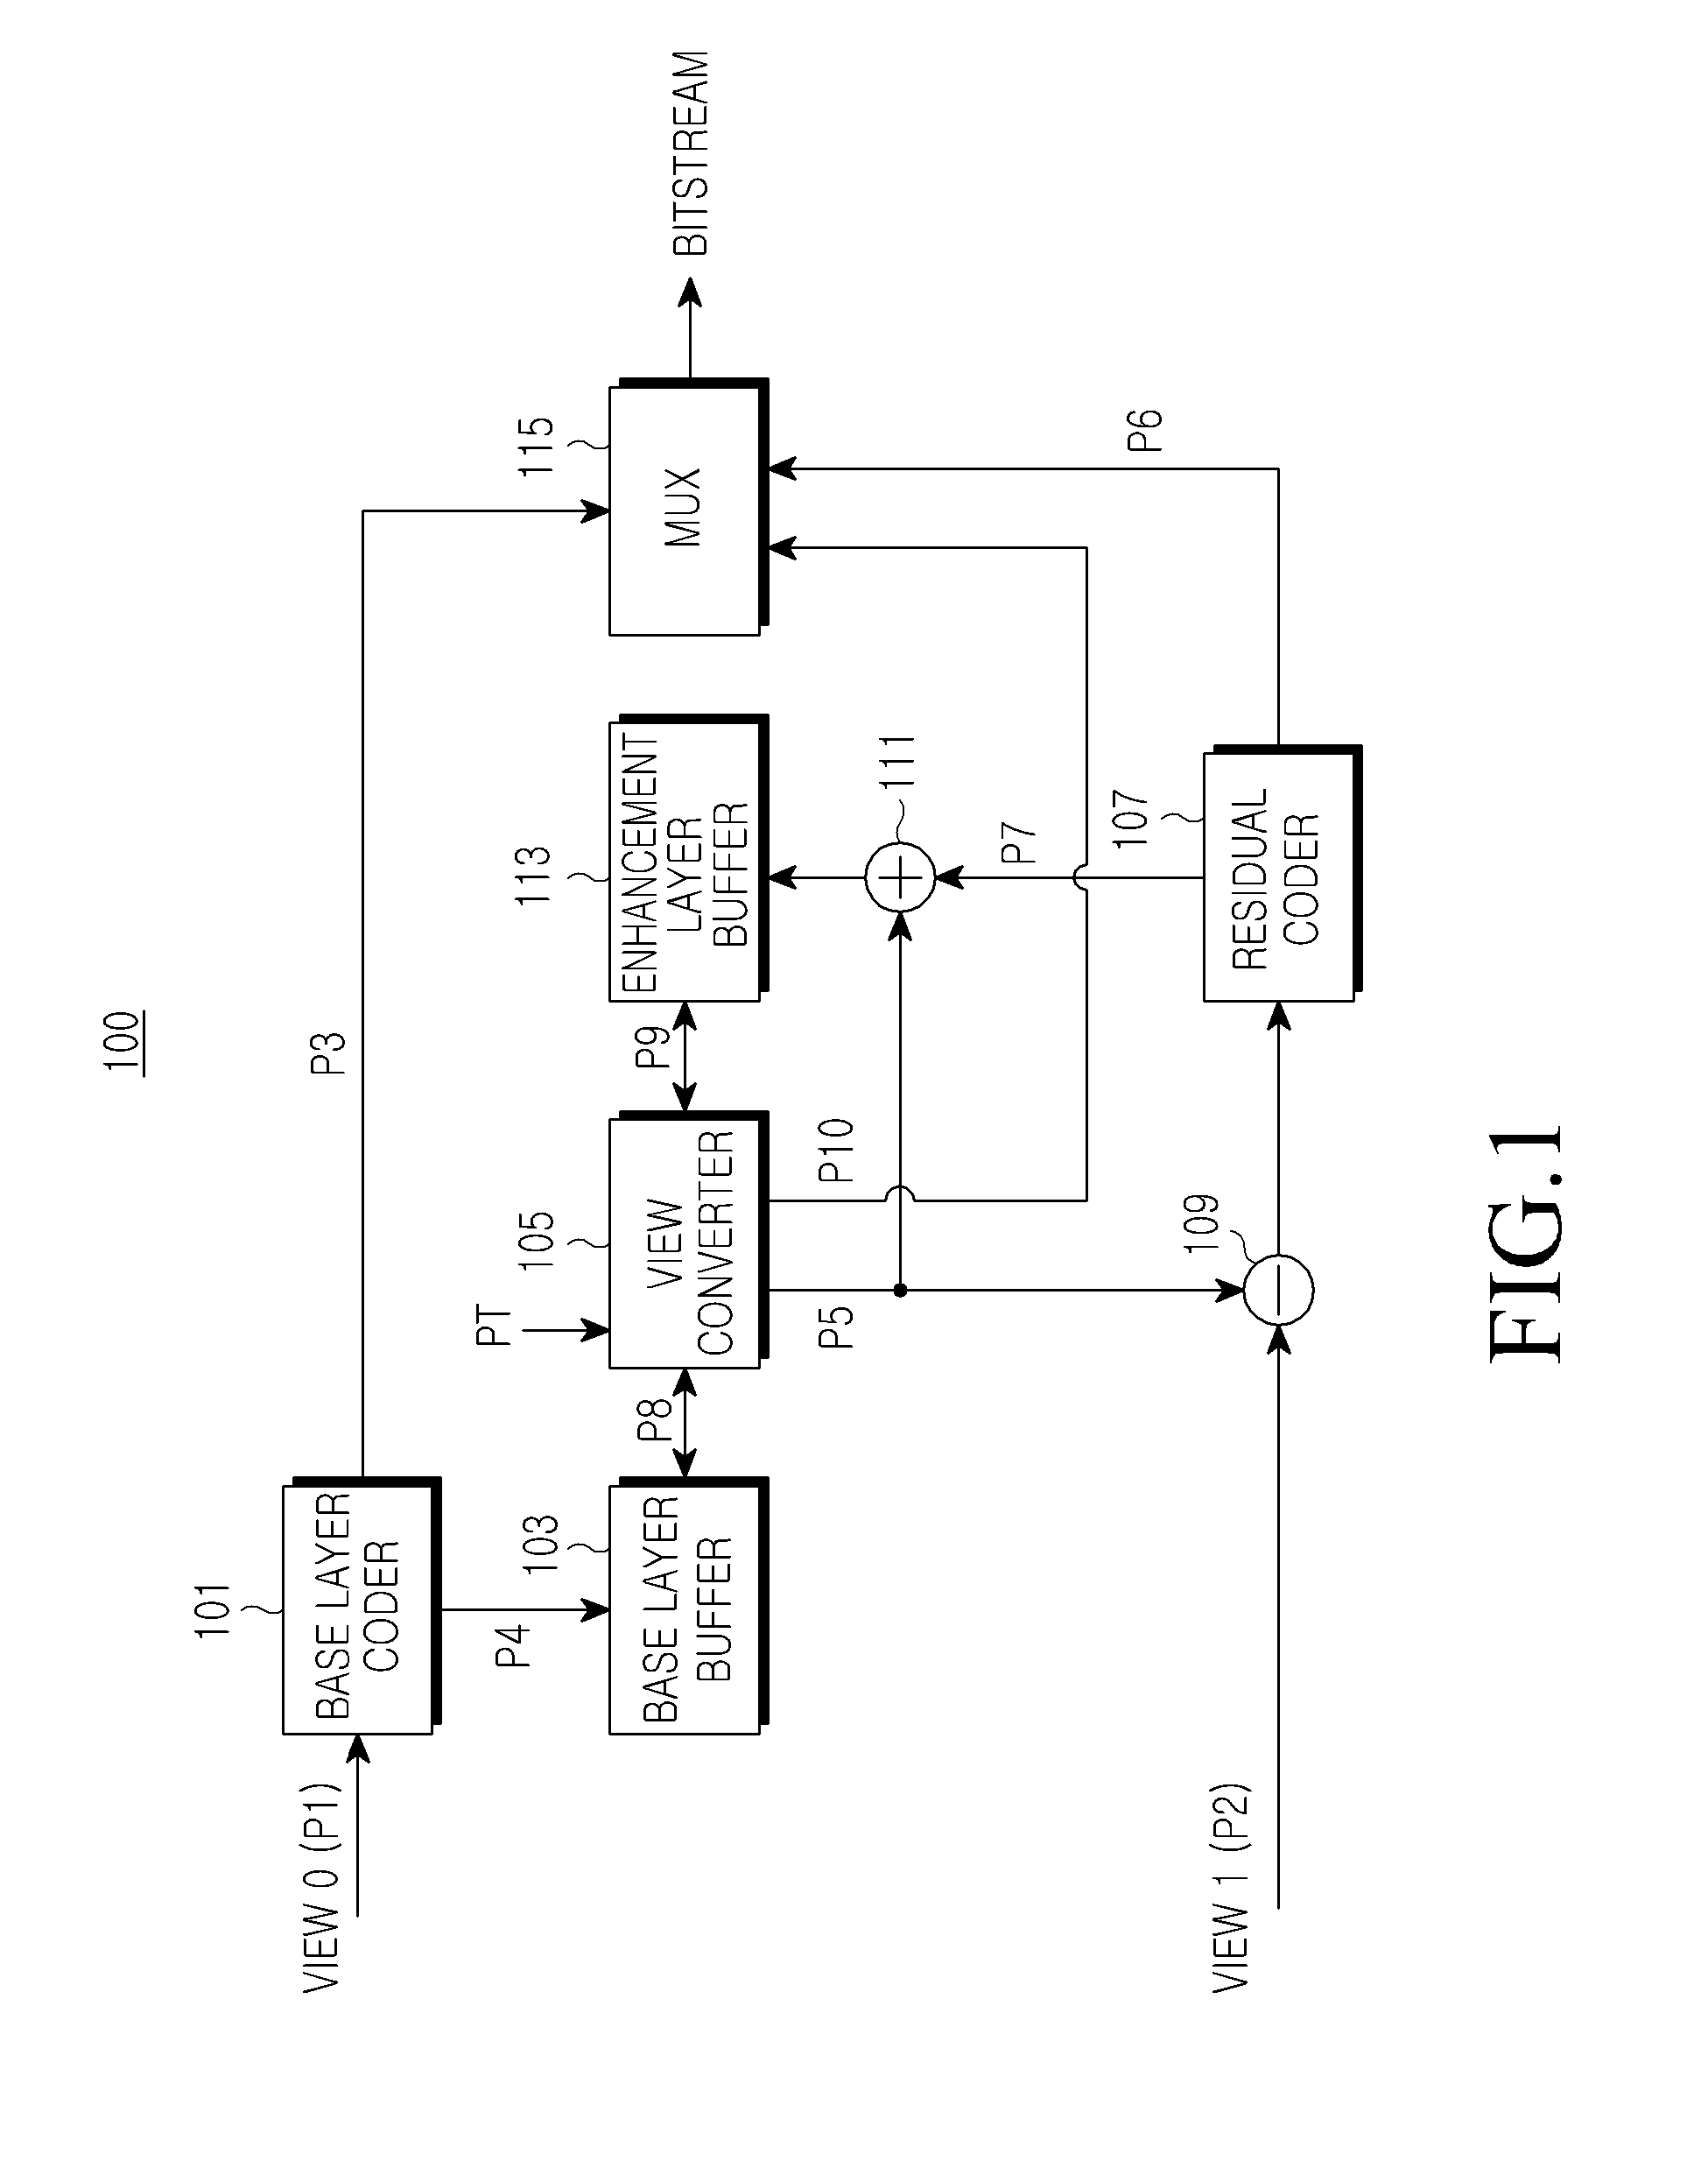 Method and apparatus for multi-view video coding and decoding